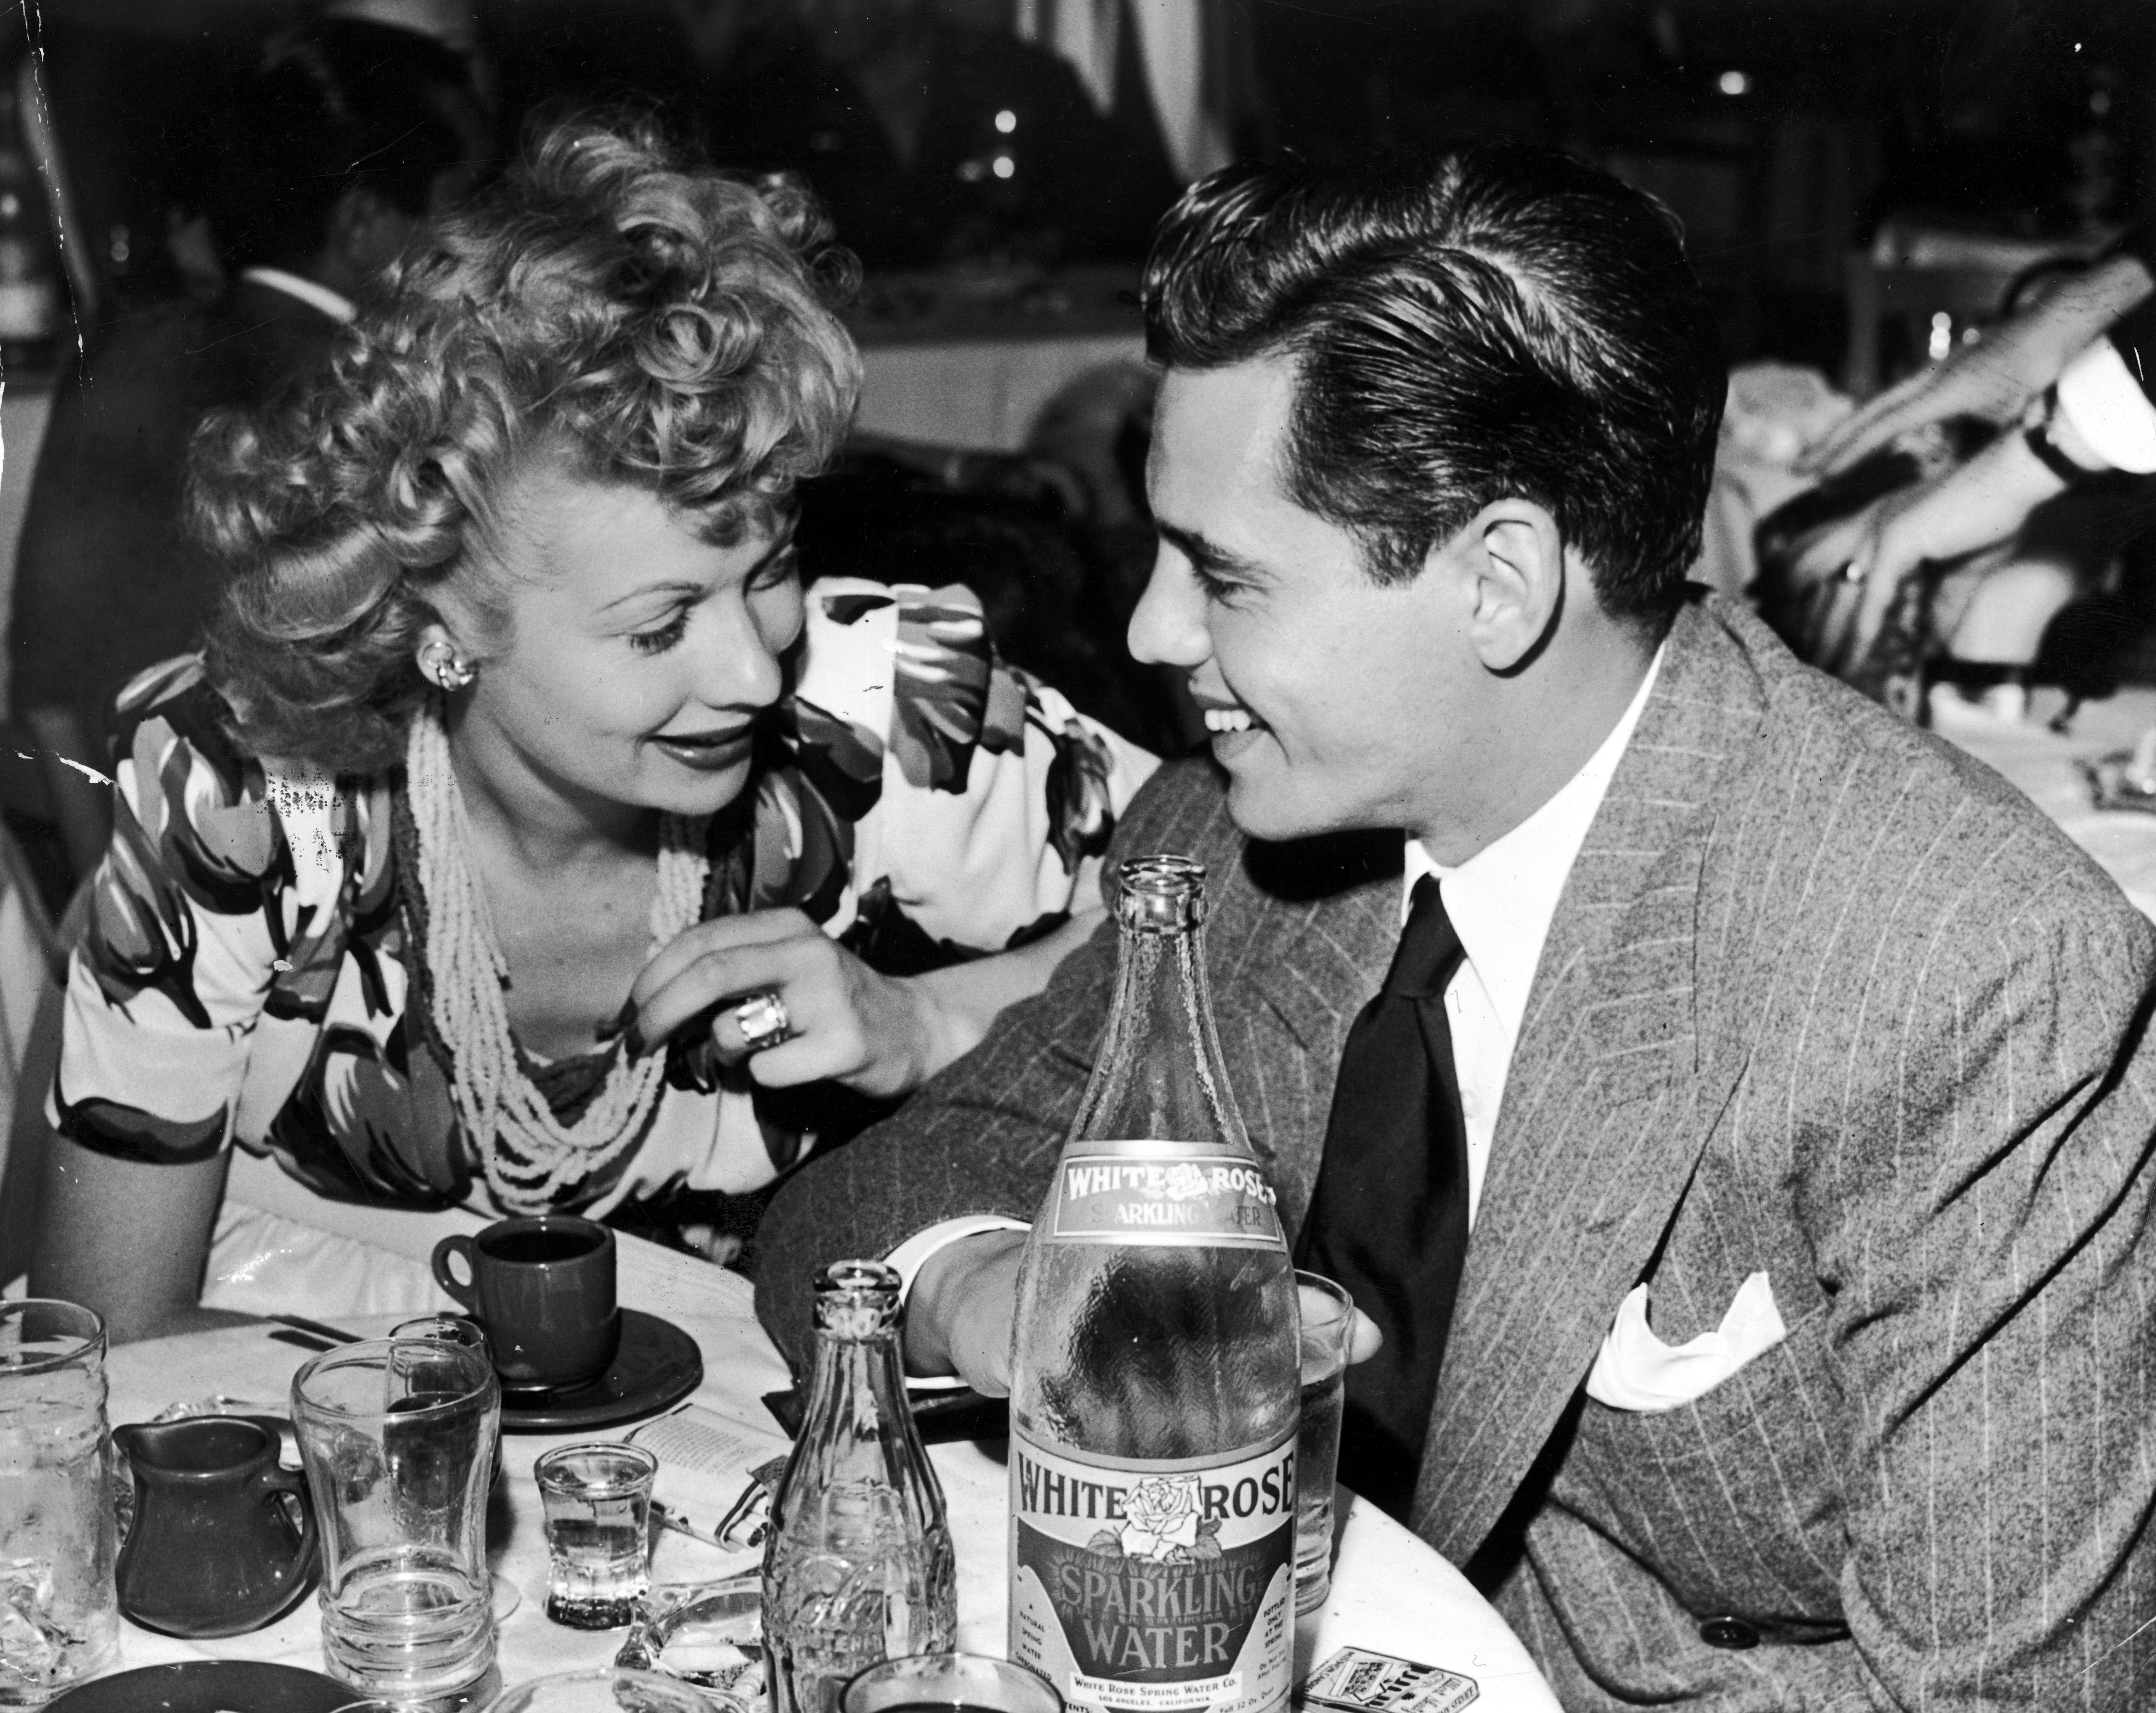 Lucille Ball and Desi Arnaz | Pictorial Parade/Archive Photos/Getty Images